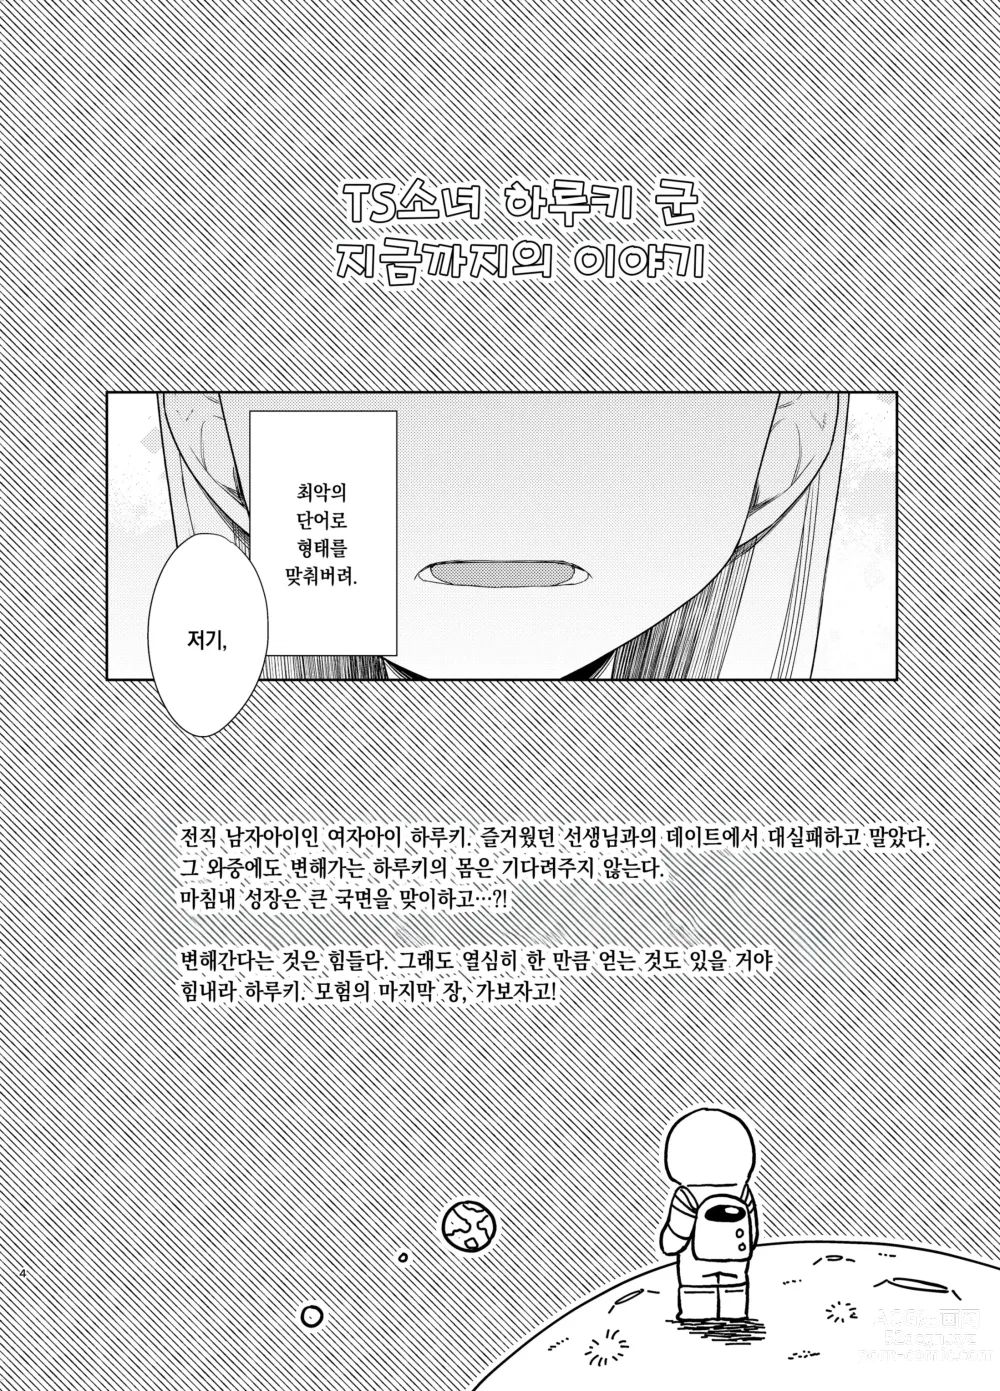 Page 3 of doujinshi TS소녀 하루키 군 5